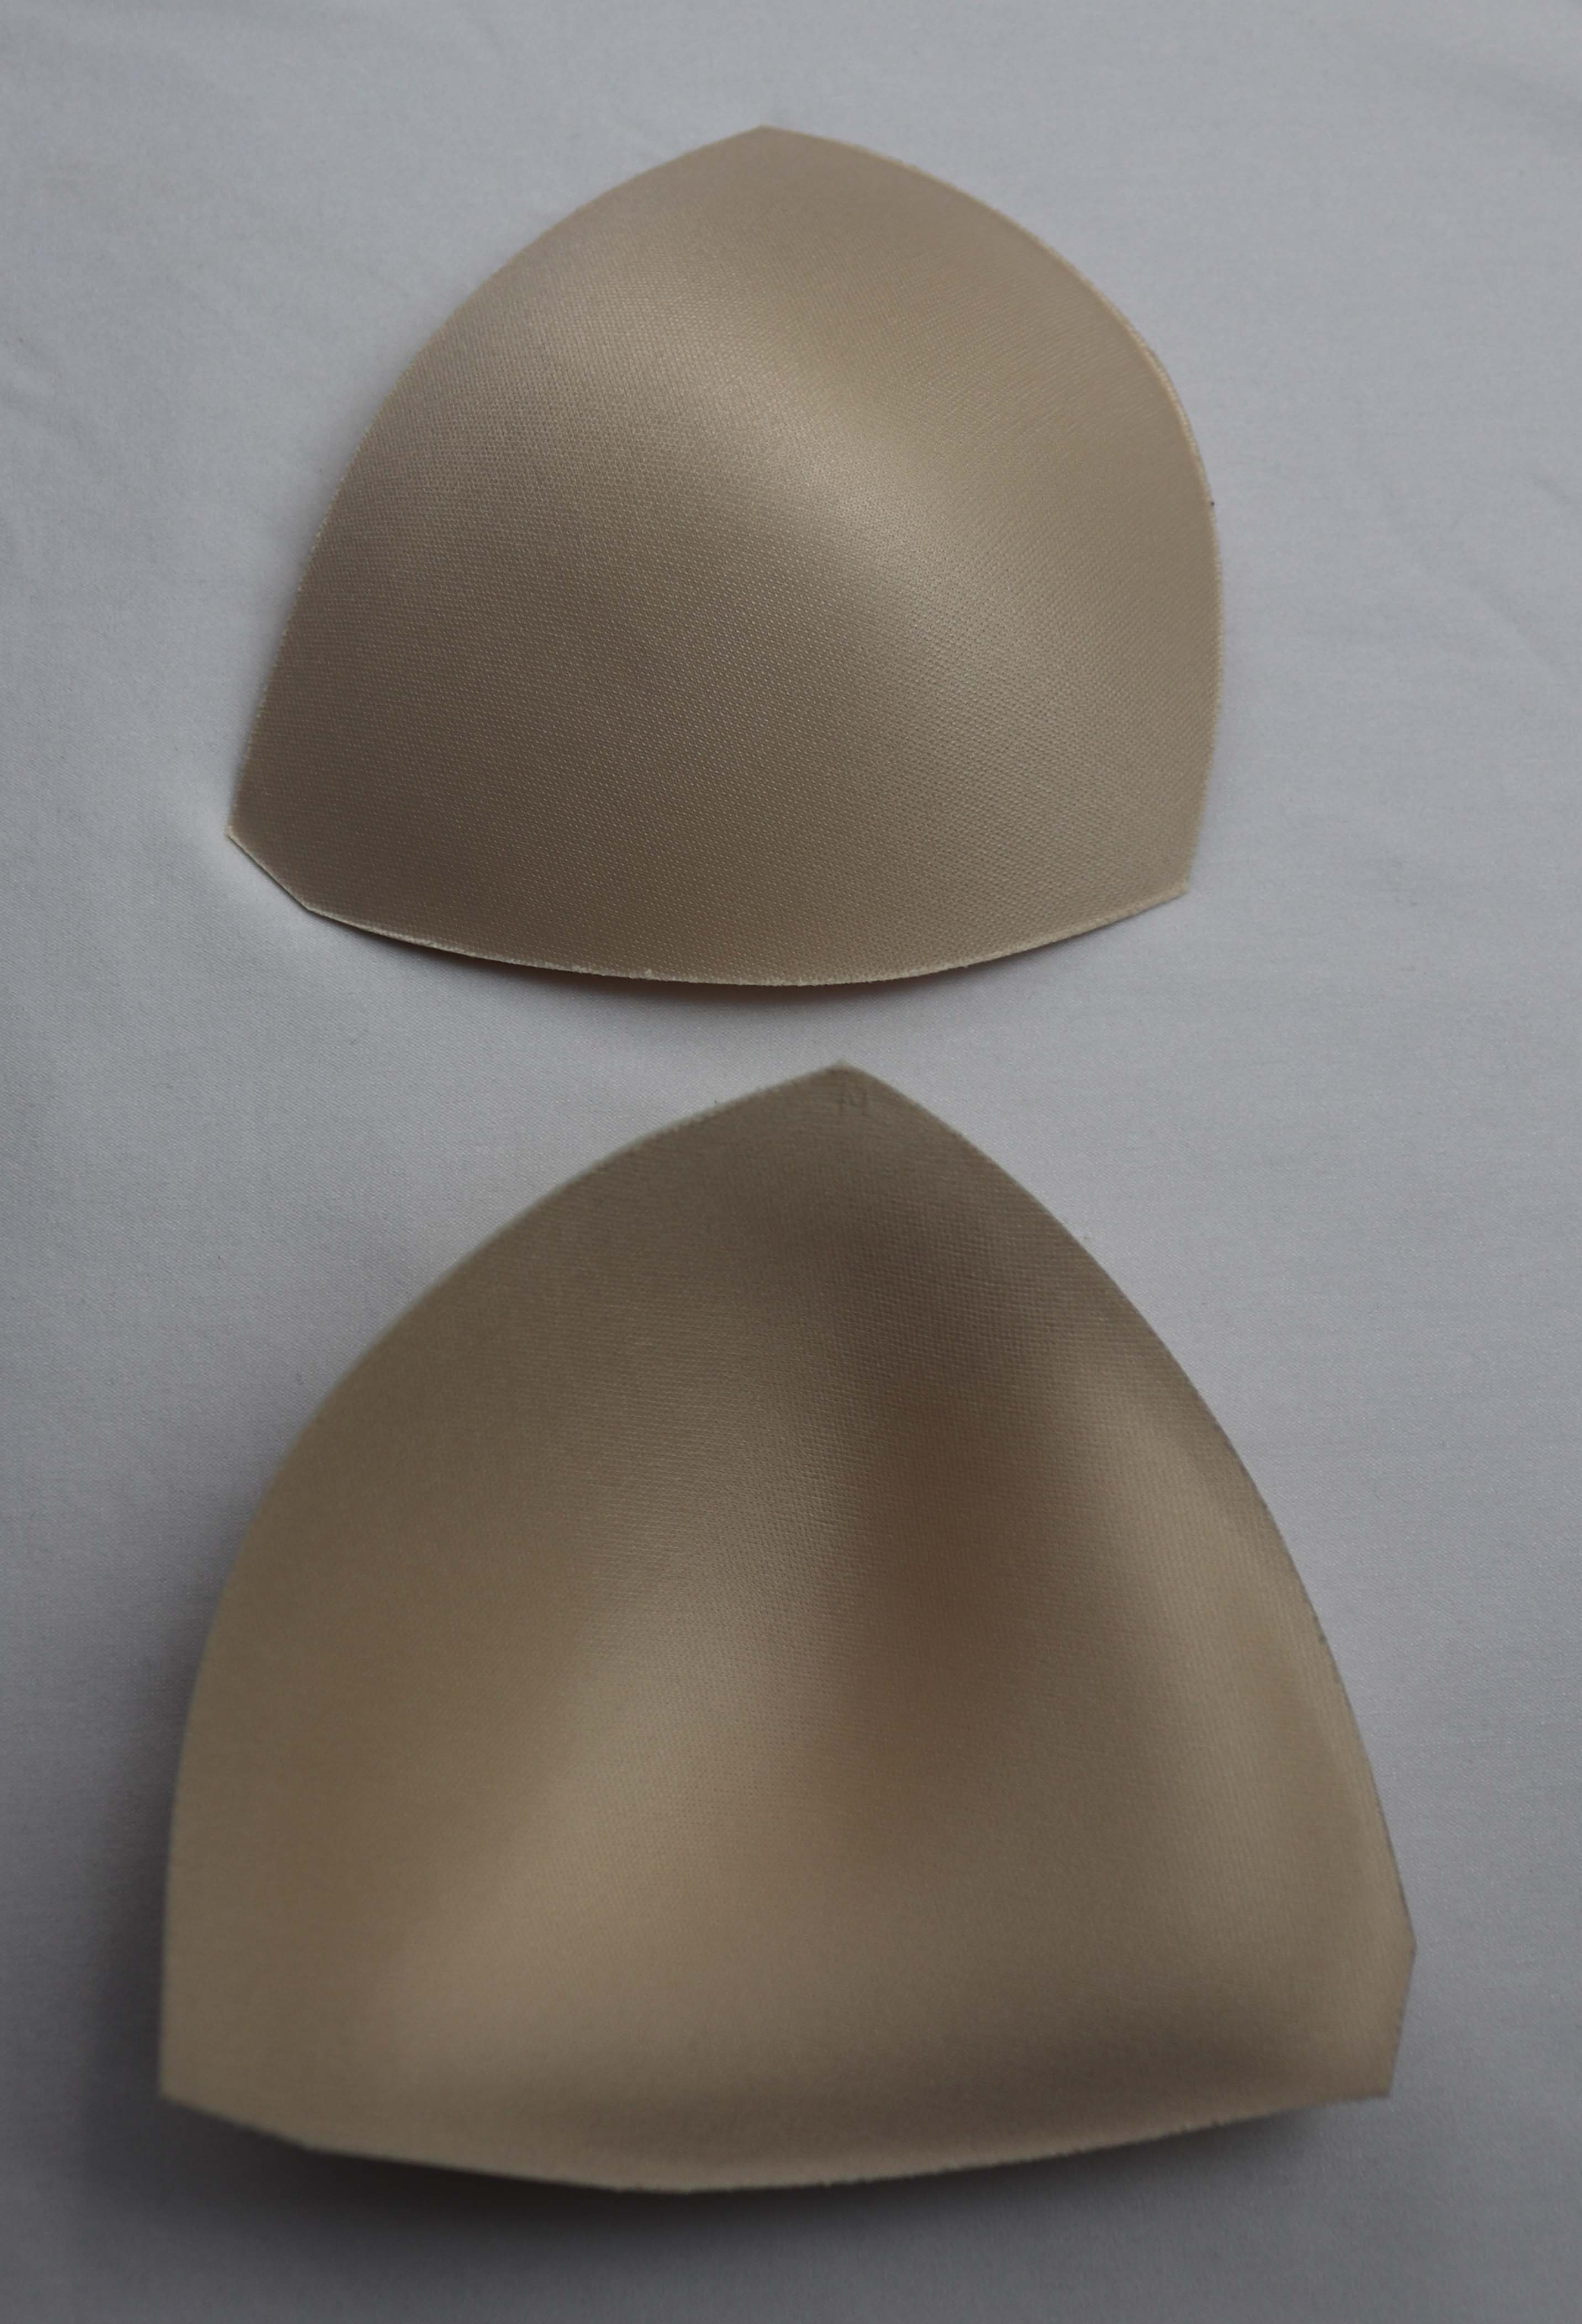 PADDED TRIANGLE BRA CUP (AB) (LEFT & RIGHT)